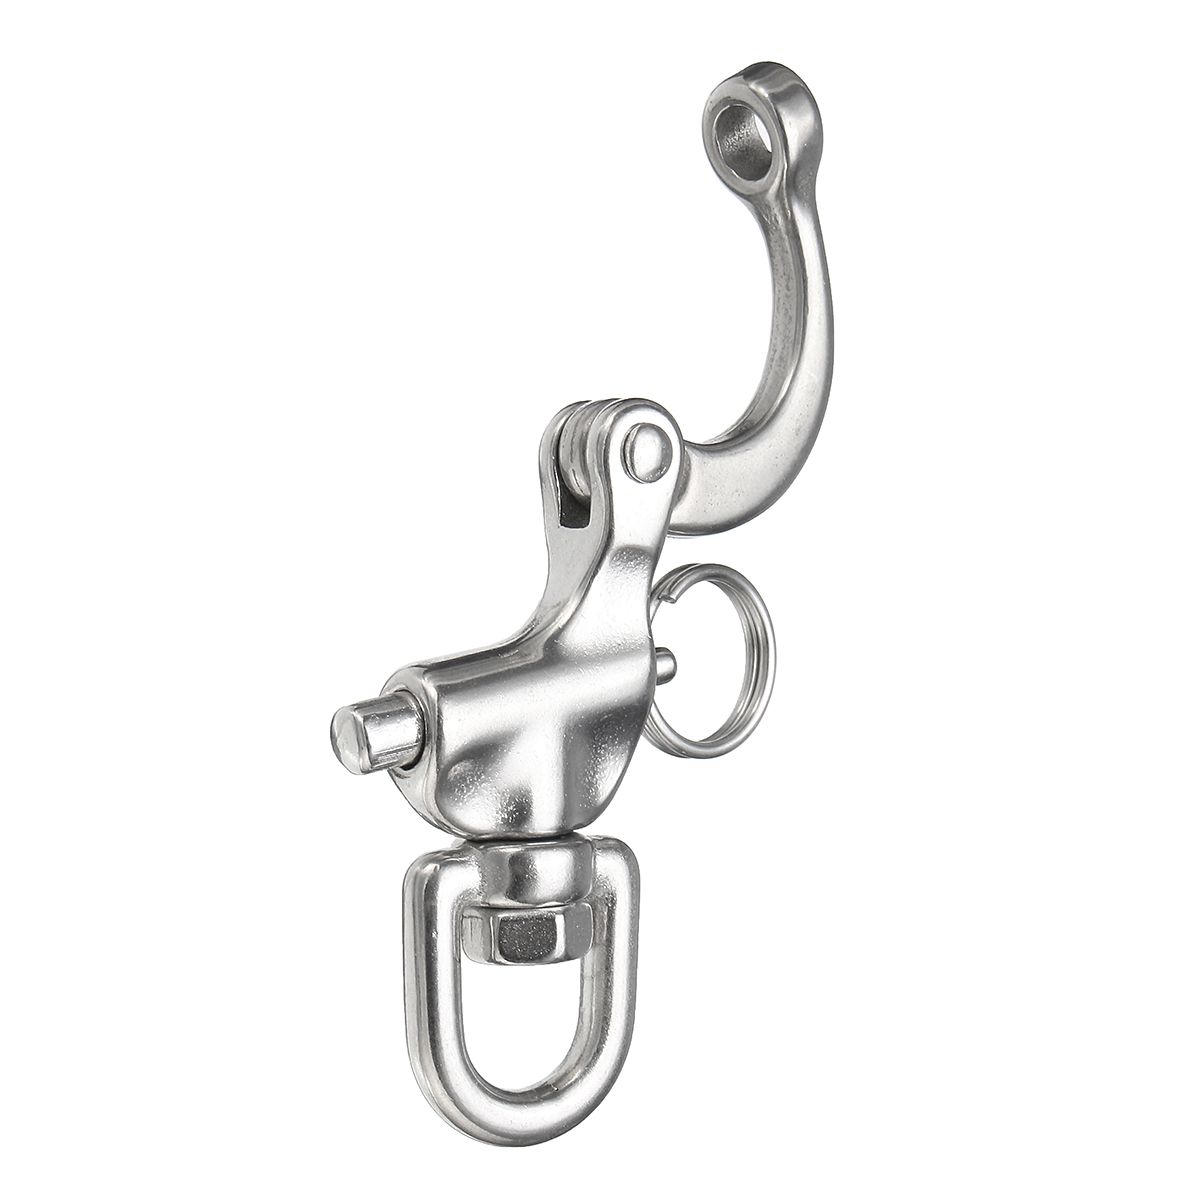 2pcs-316-Stainless-Steel-Quick-Release-Boat-Anchor-Chain-Eye-Shackle-SwiveI-Snap-Hook-1330256